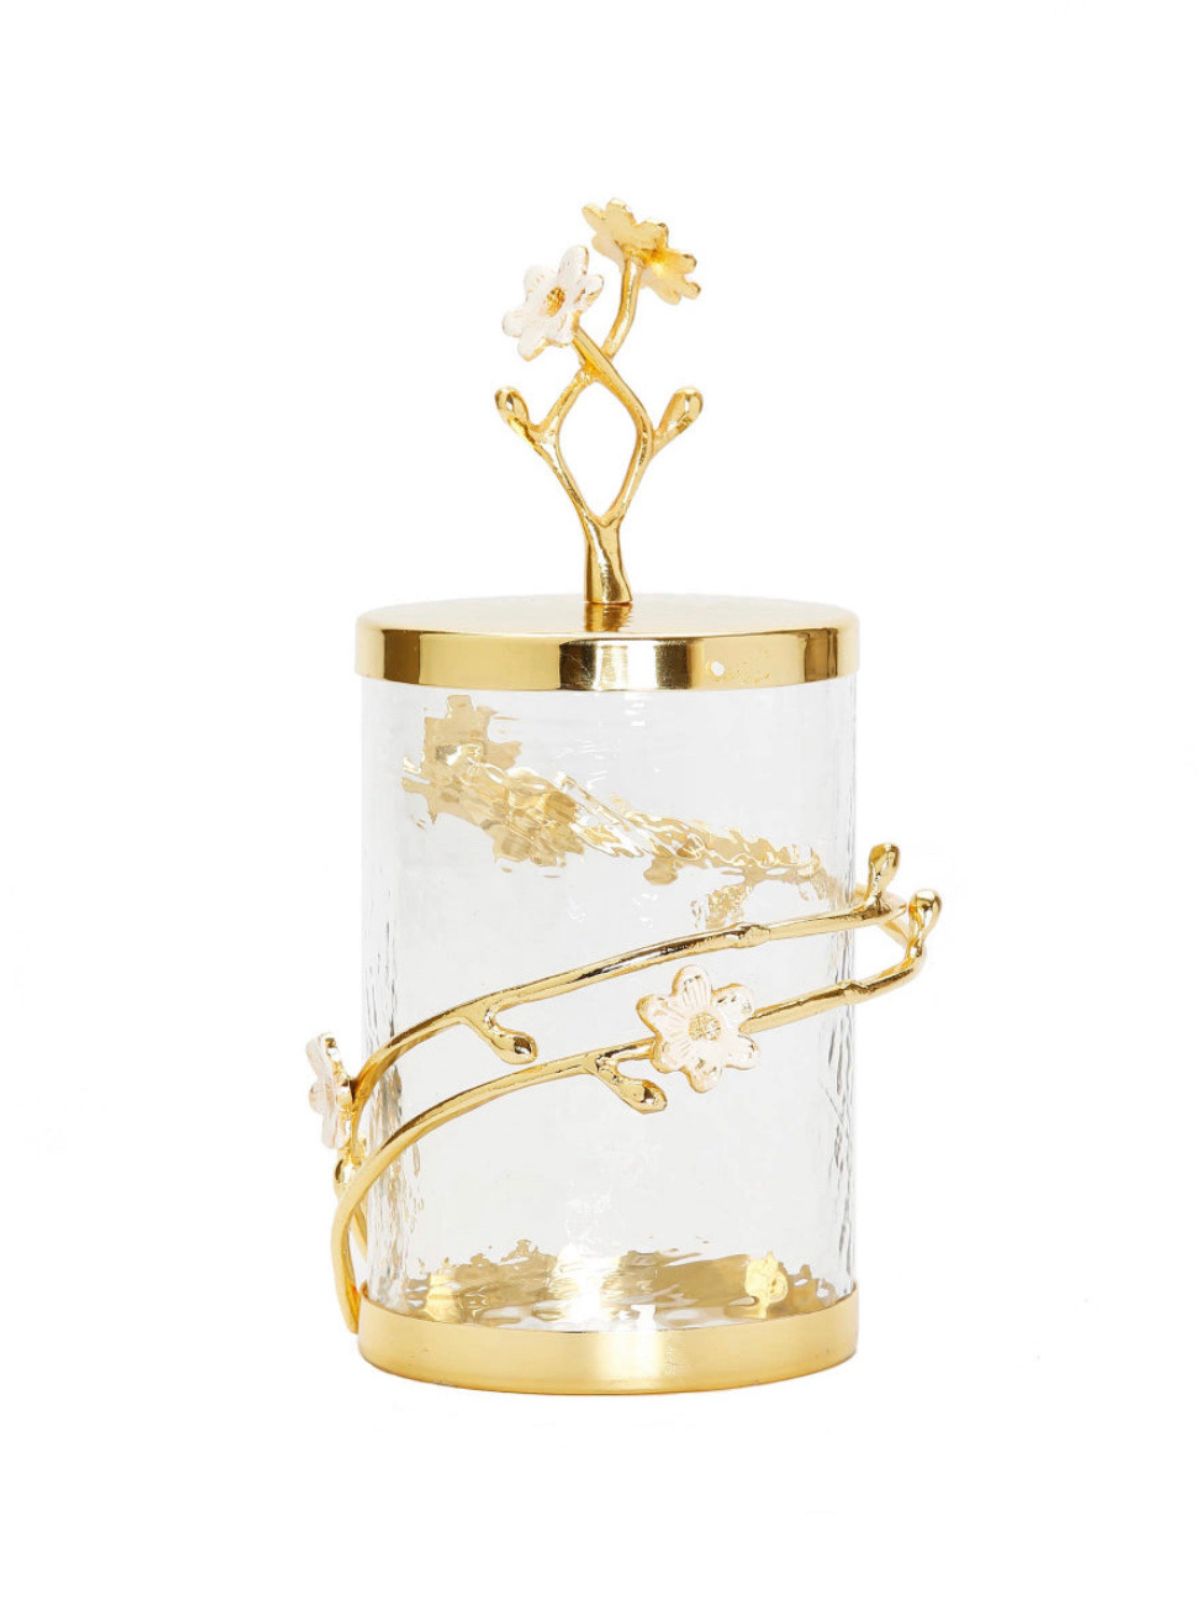 8H Luxury Glass Canister with Enamel Cherry Blossom Flower Design and Gold Lid - KYA Home Decor. 